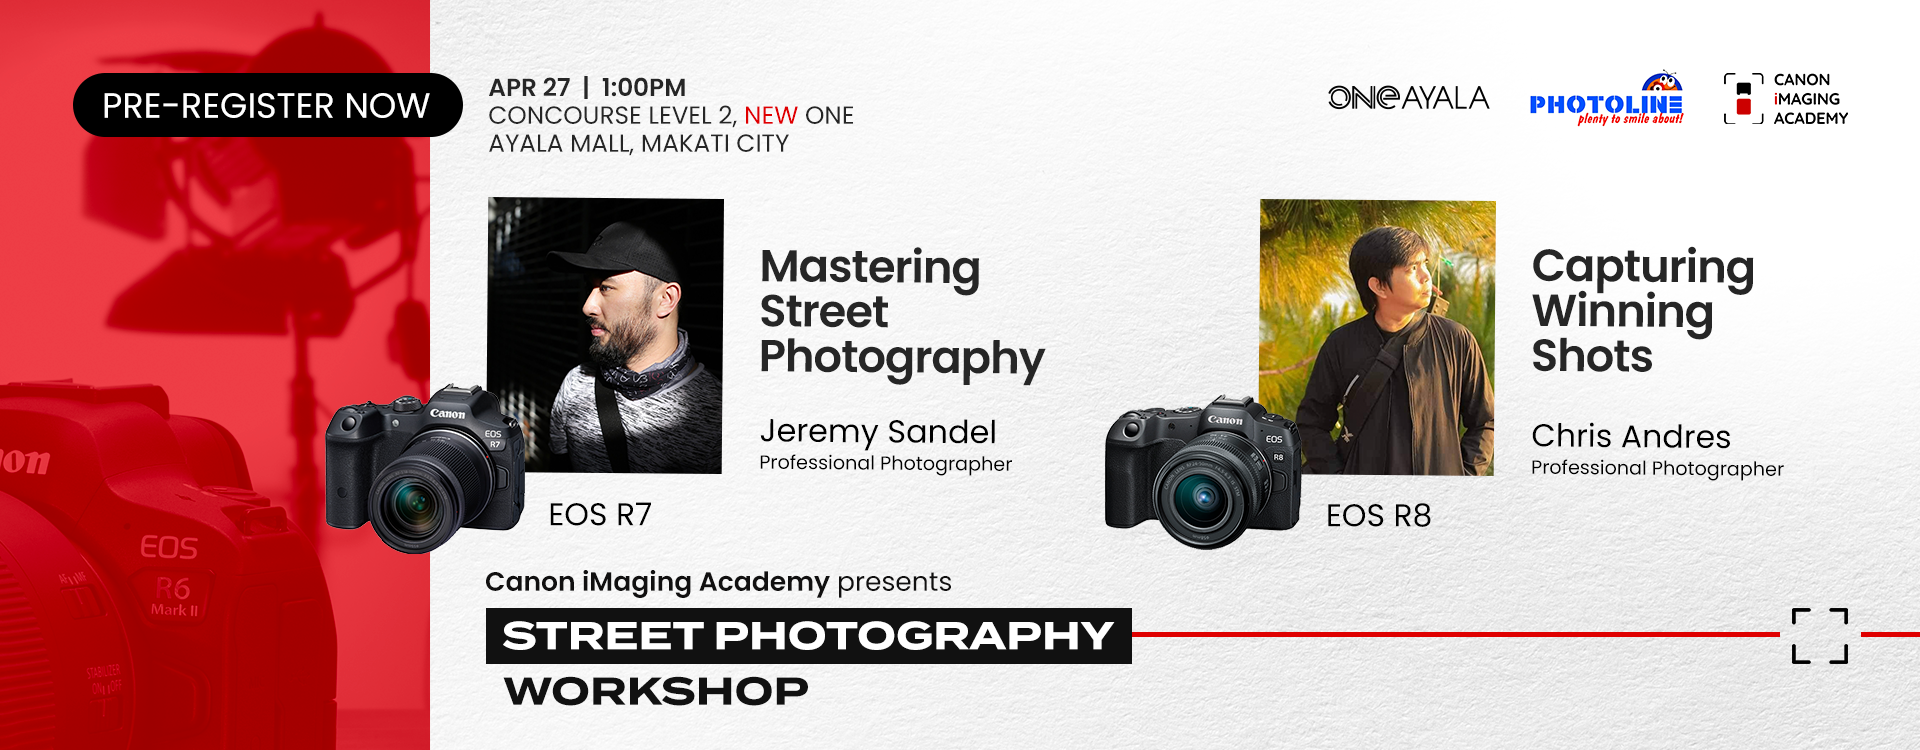 Street Photography Workshop with Chris Andres and Jeremy Sandel